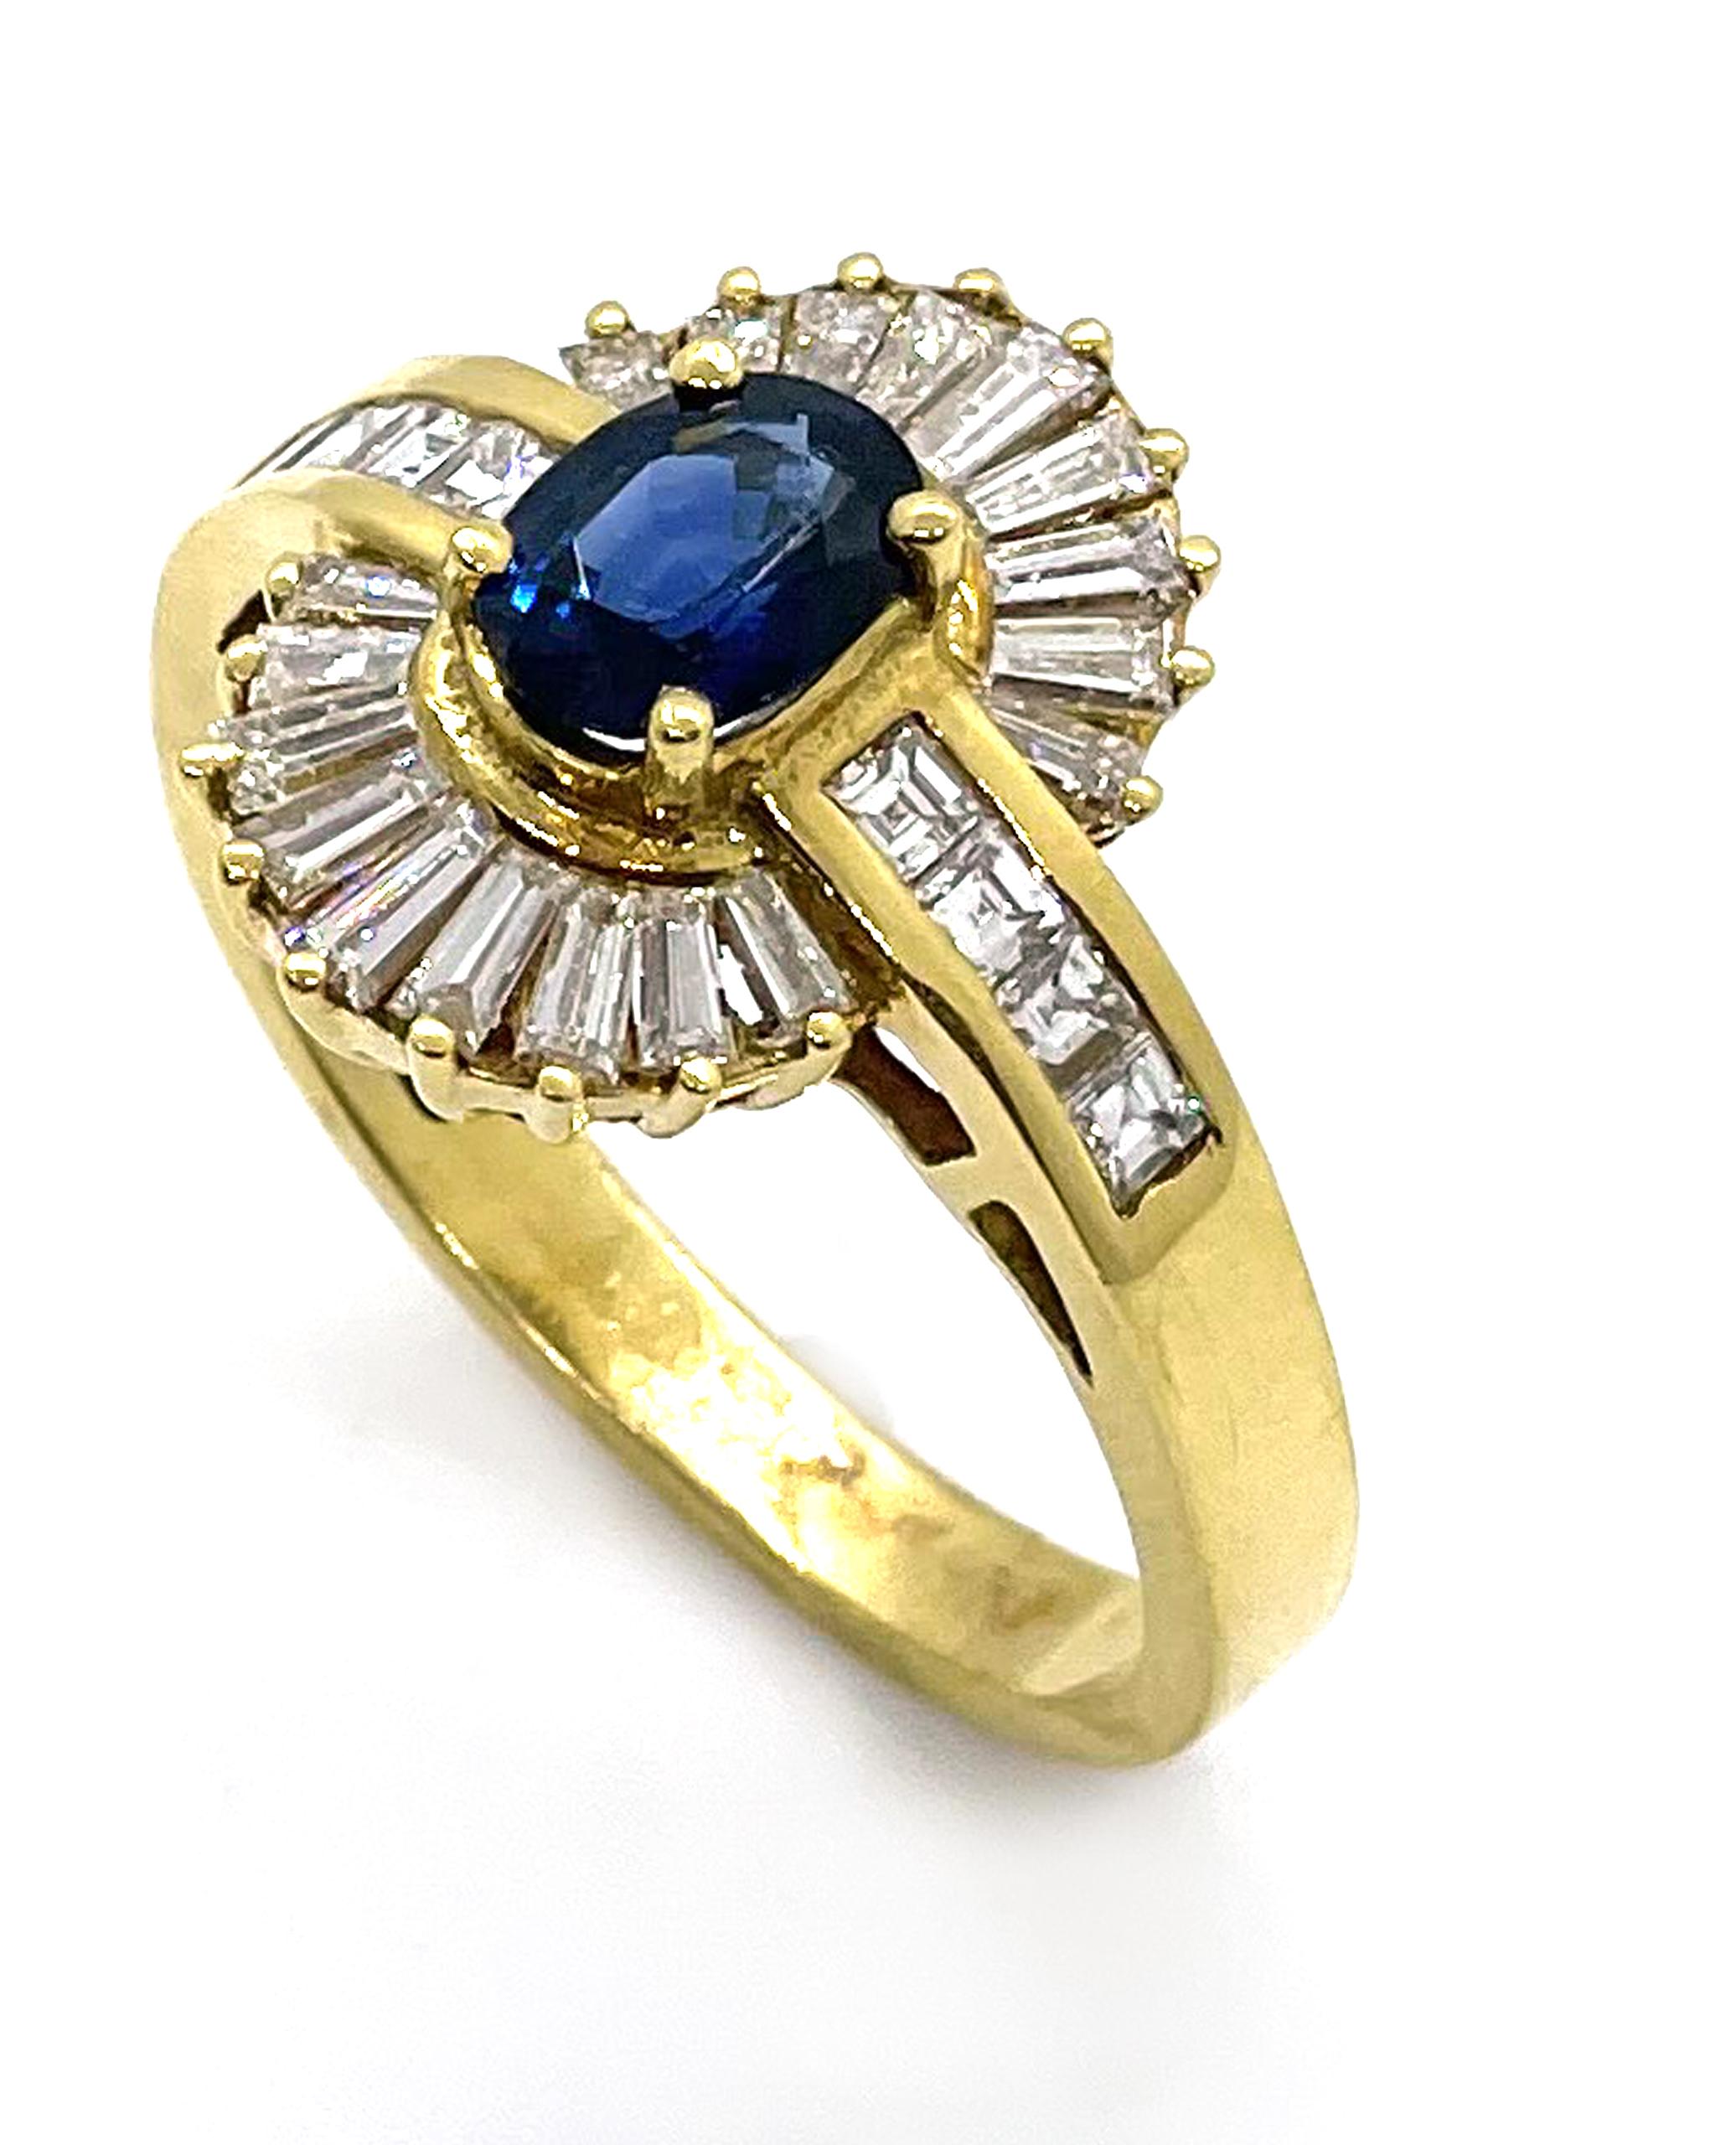 Retro Vintage Sapphire Ring with Baguette Diamonds Set in 18k Gold, Circa 1985 For Sale